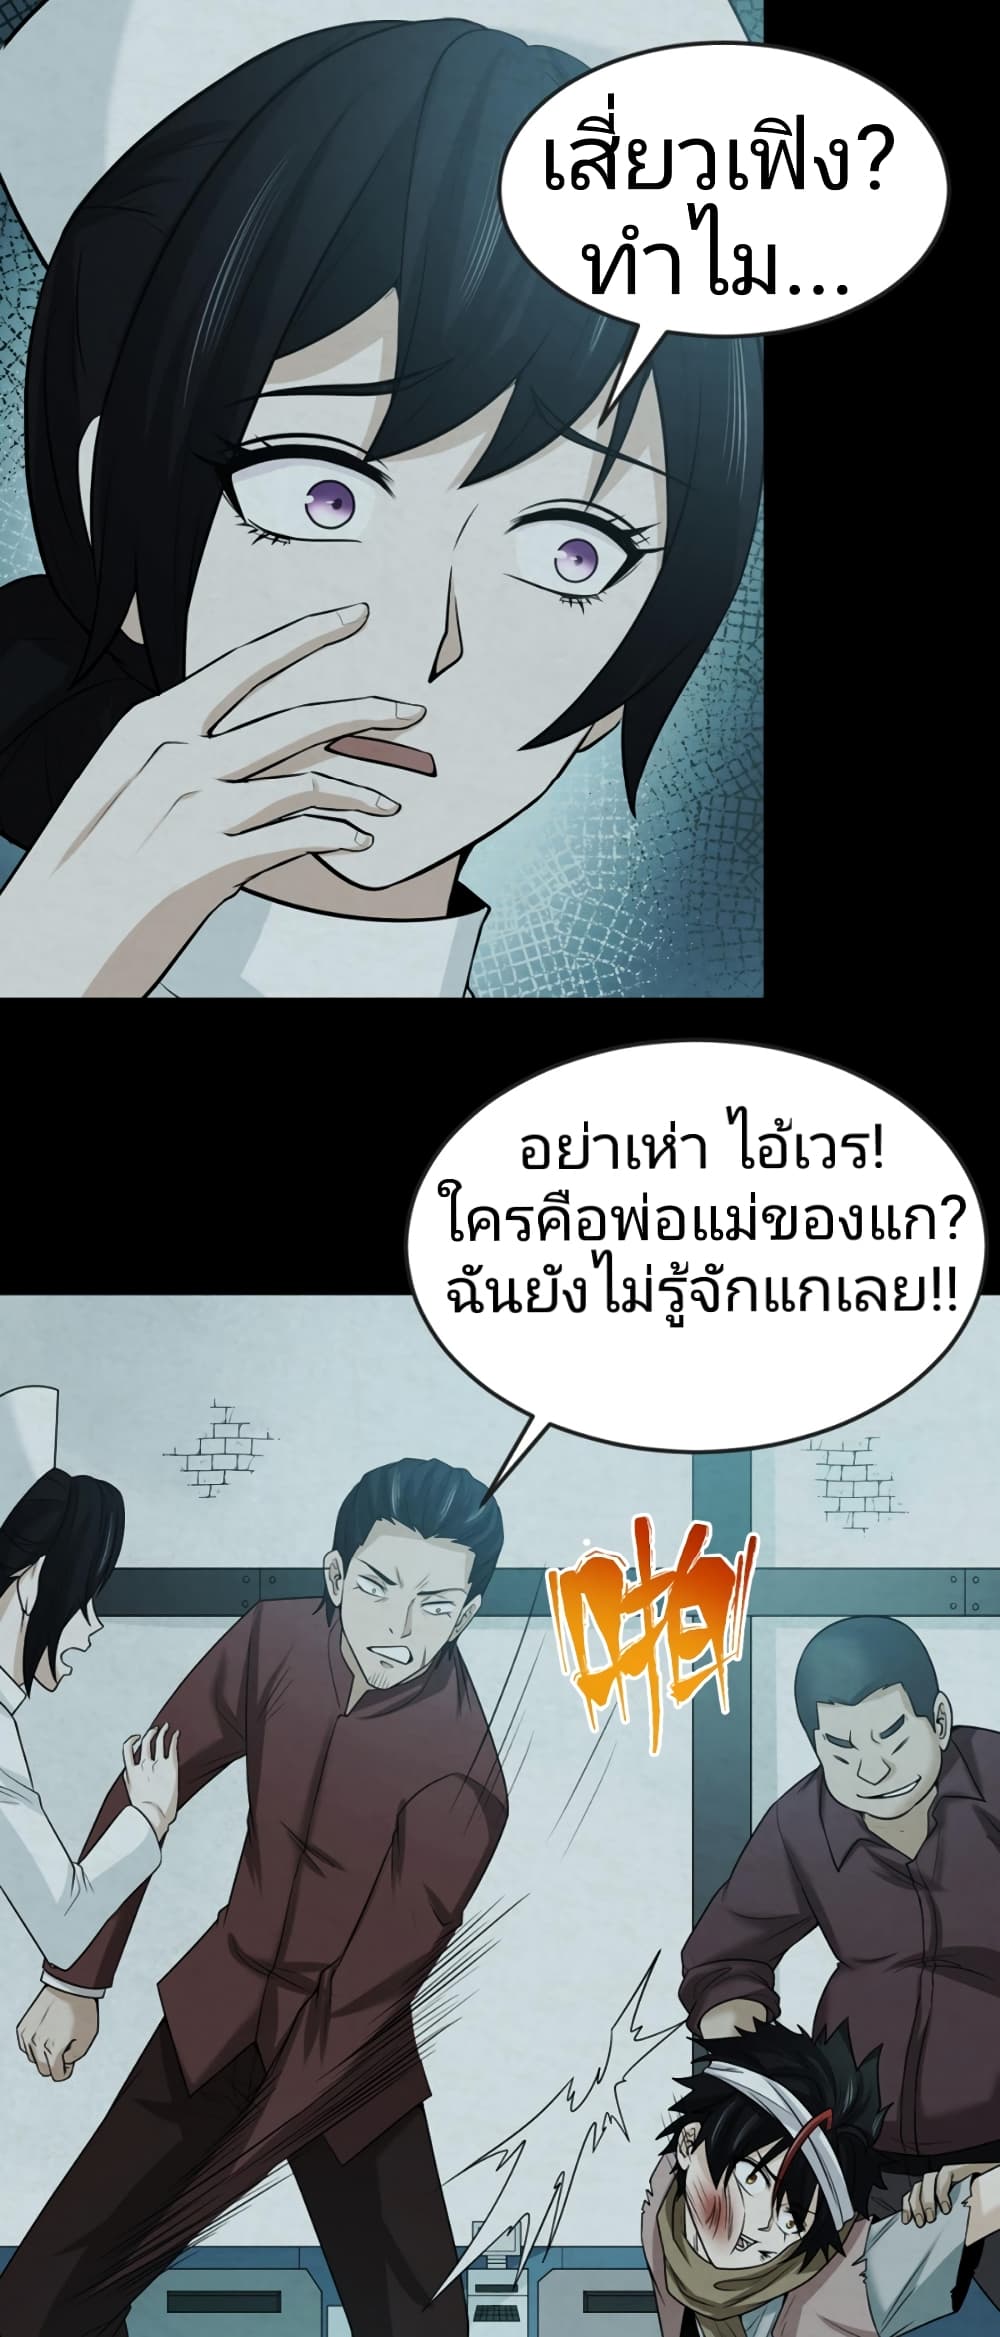 The Age of Ghost Spirits à¸à¸­à¸à¸à¸µà¹ 33 (3)